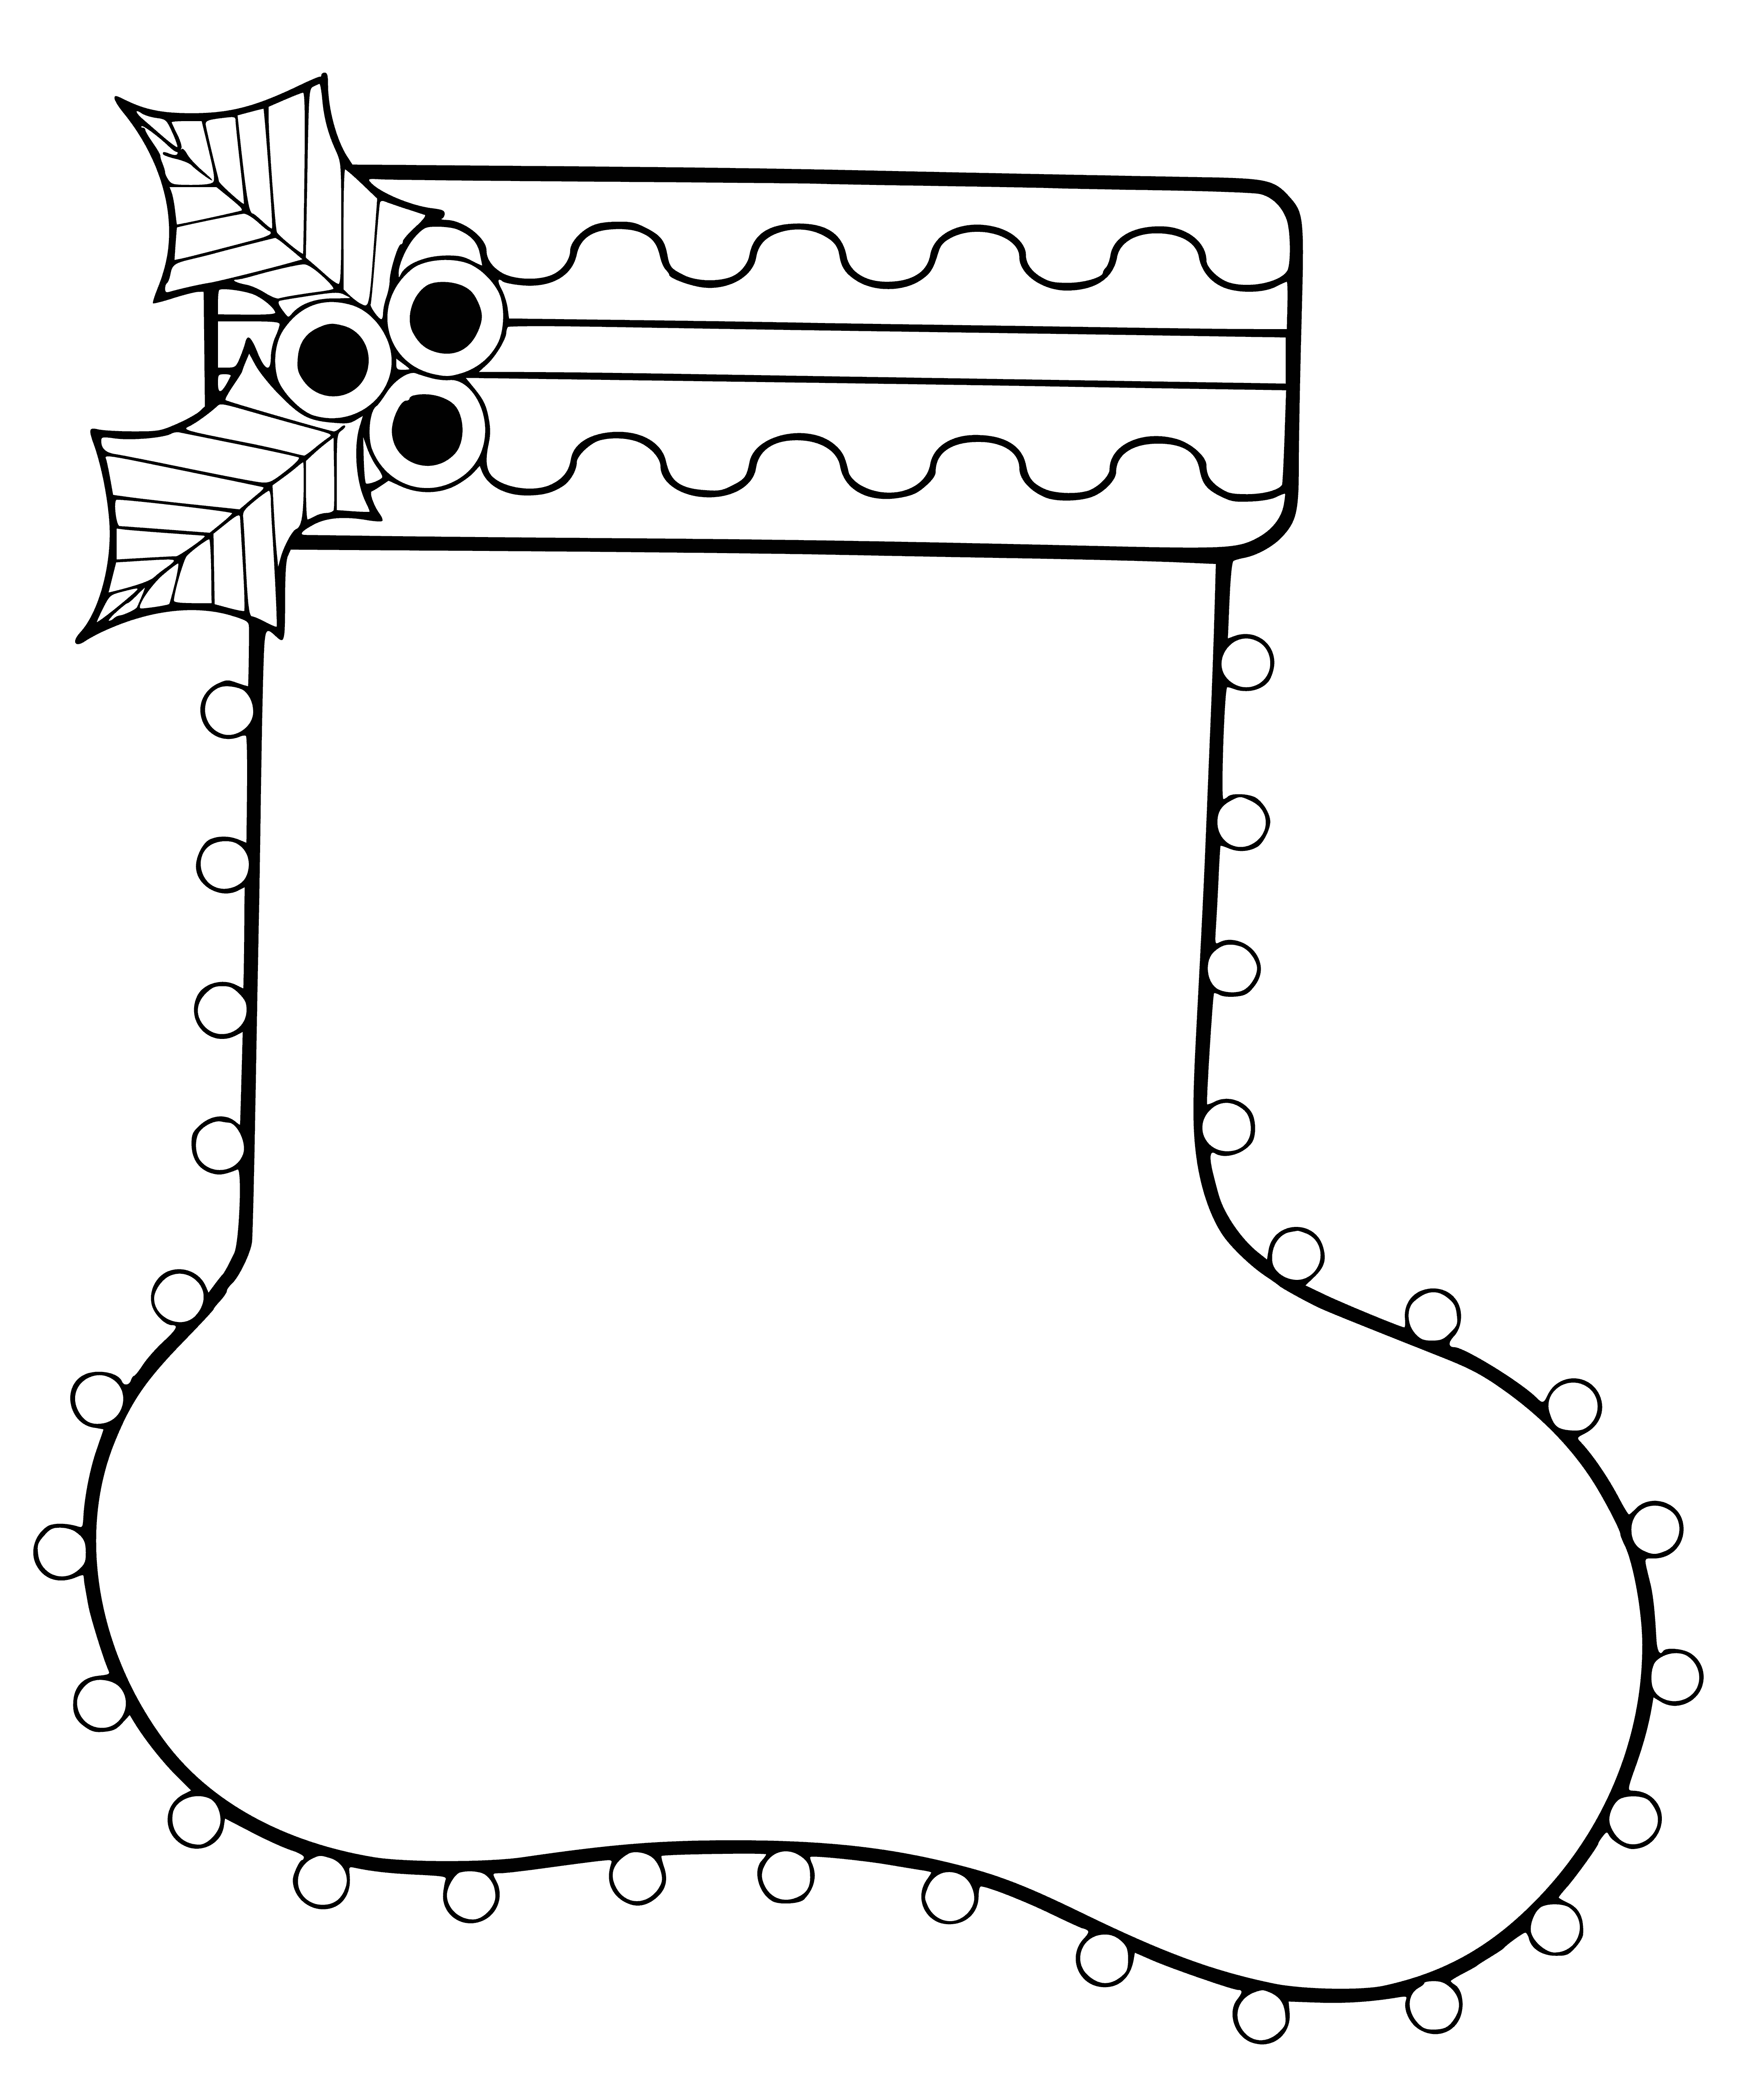 coloring page: Festive Christmas socks with red & green trees & white trim, perfect for the holiday season!